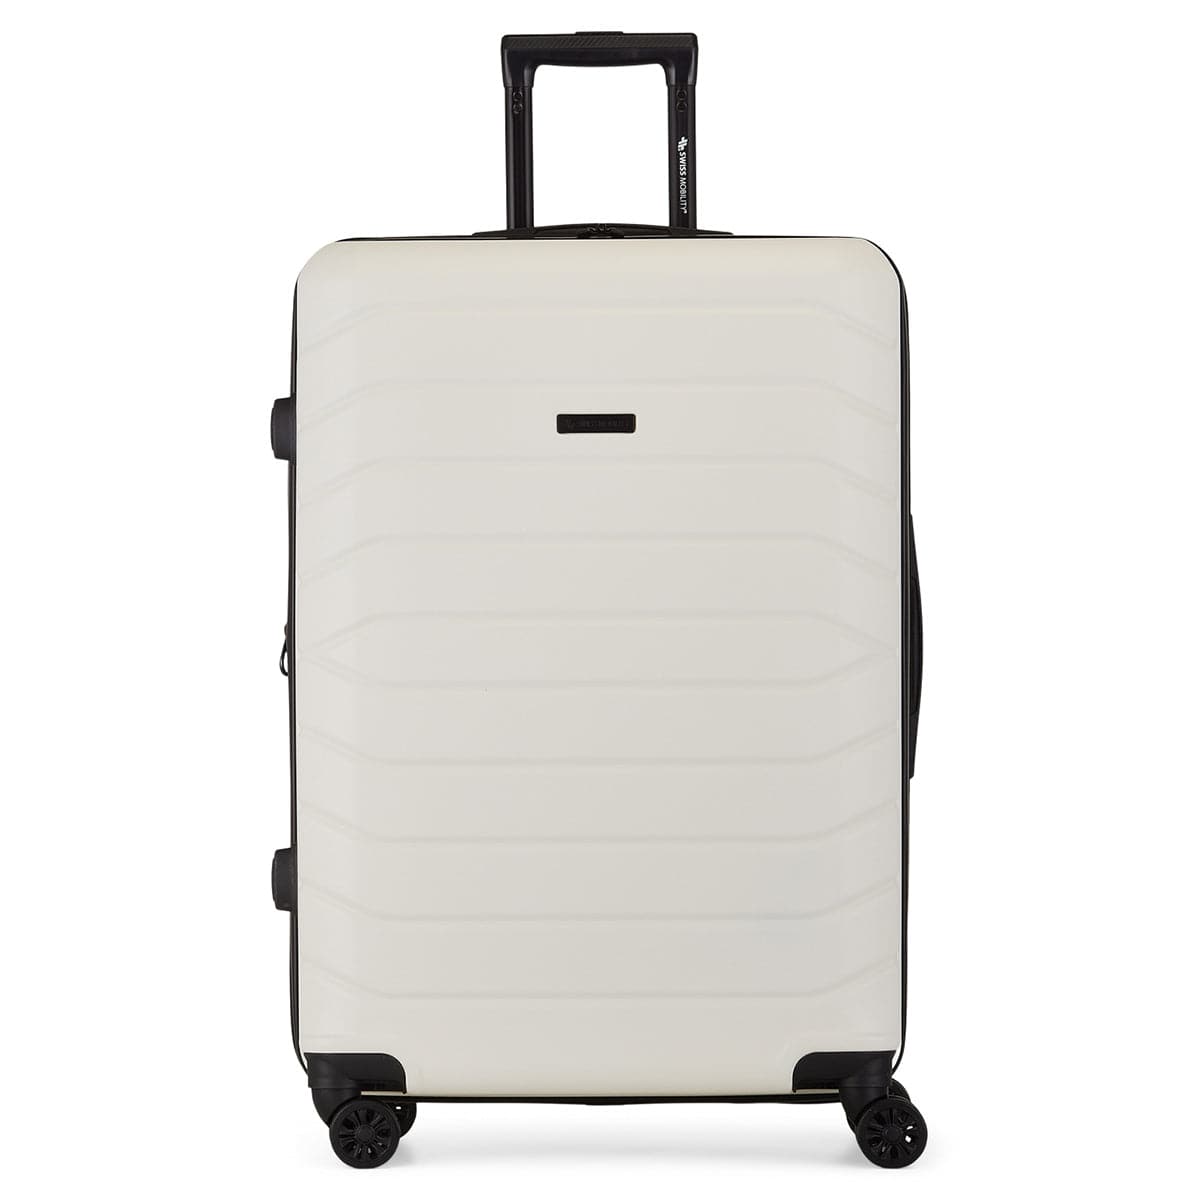 Swiss Mobility CDG Two Piece Luggage Set